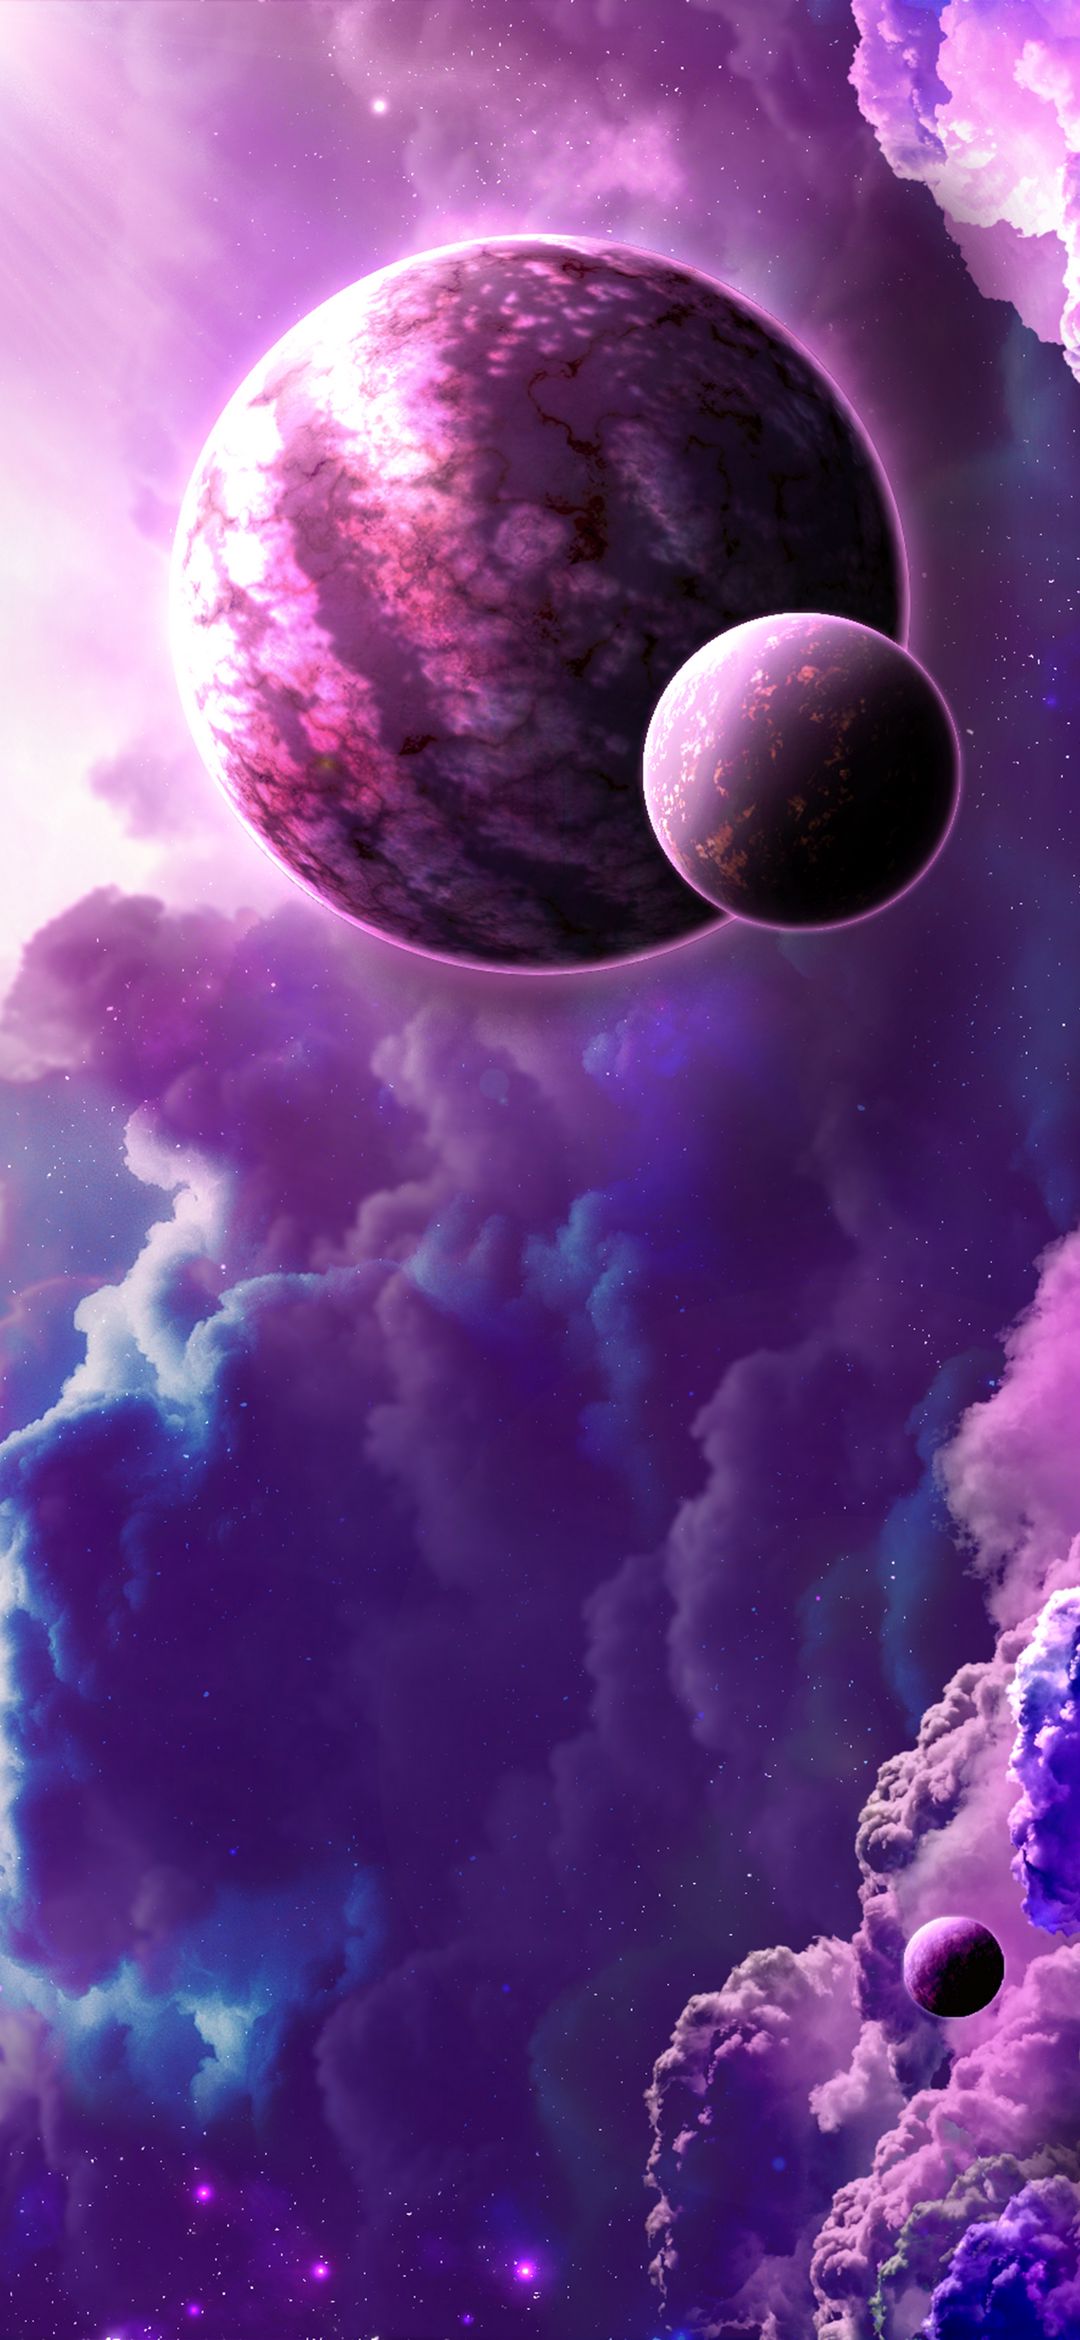 Download Exploring the depths of a cosmic purple space  Wallpaperscom